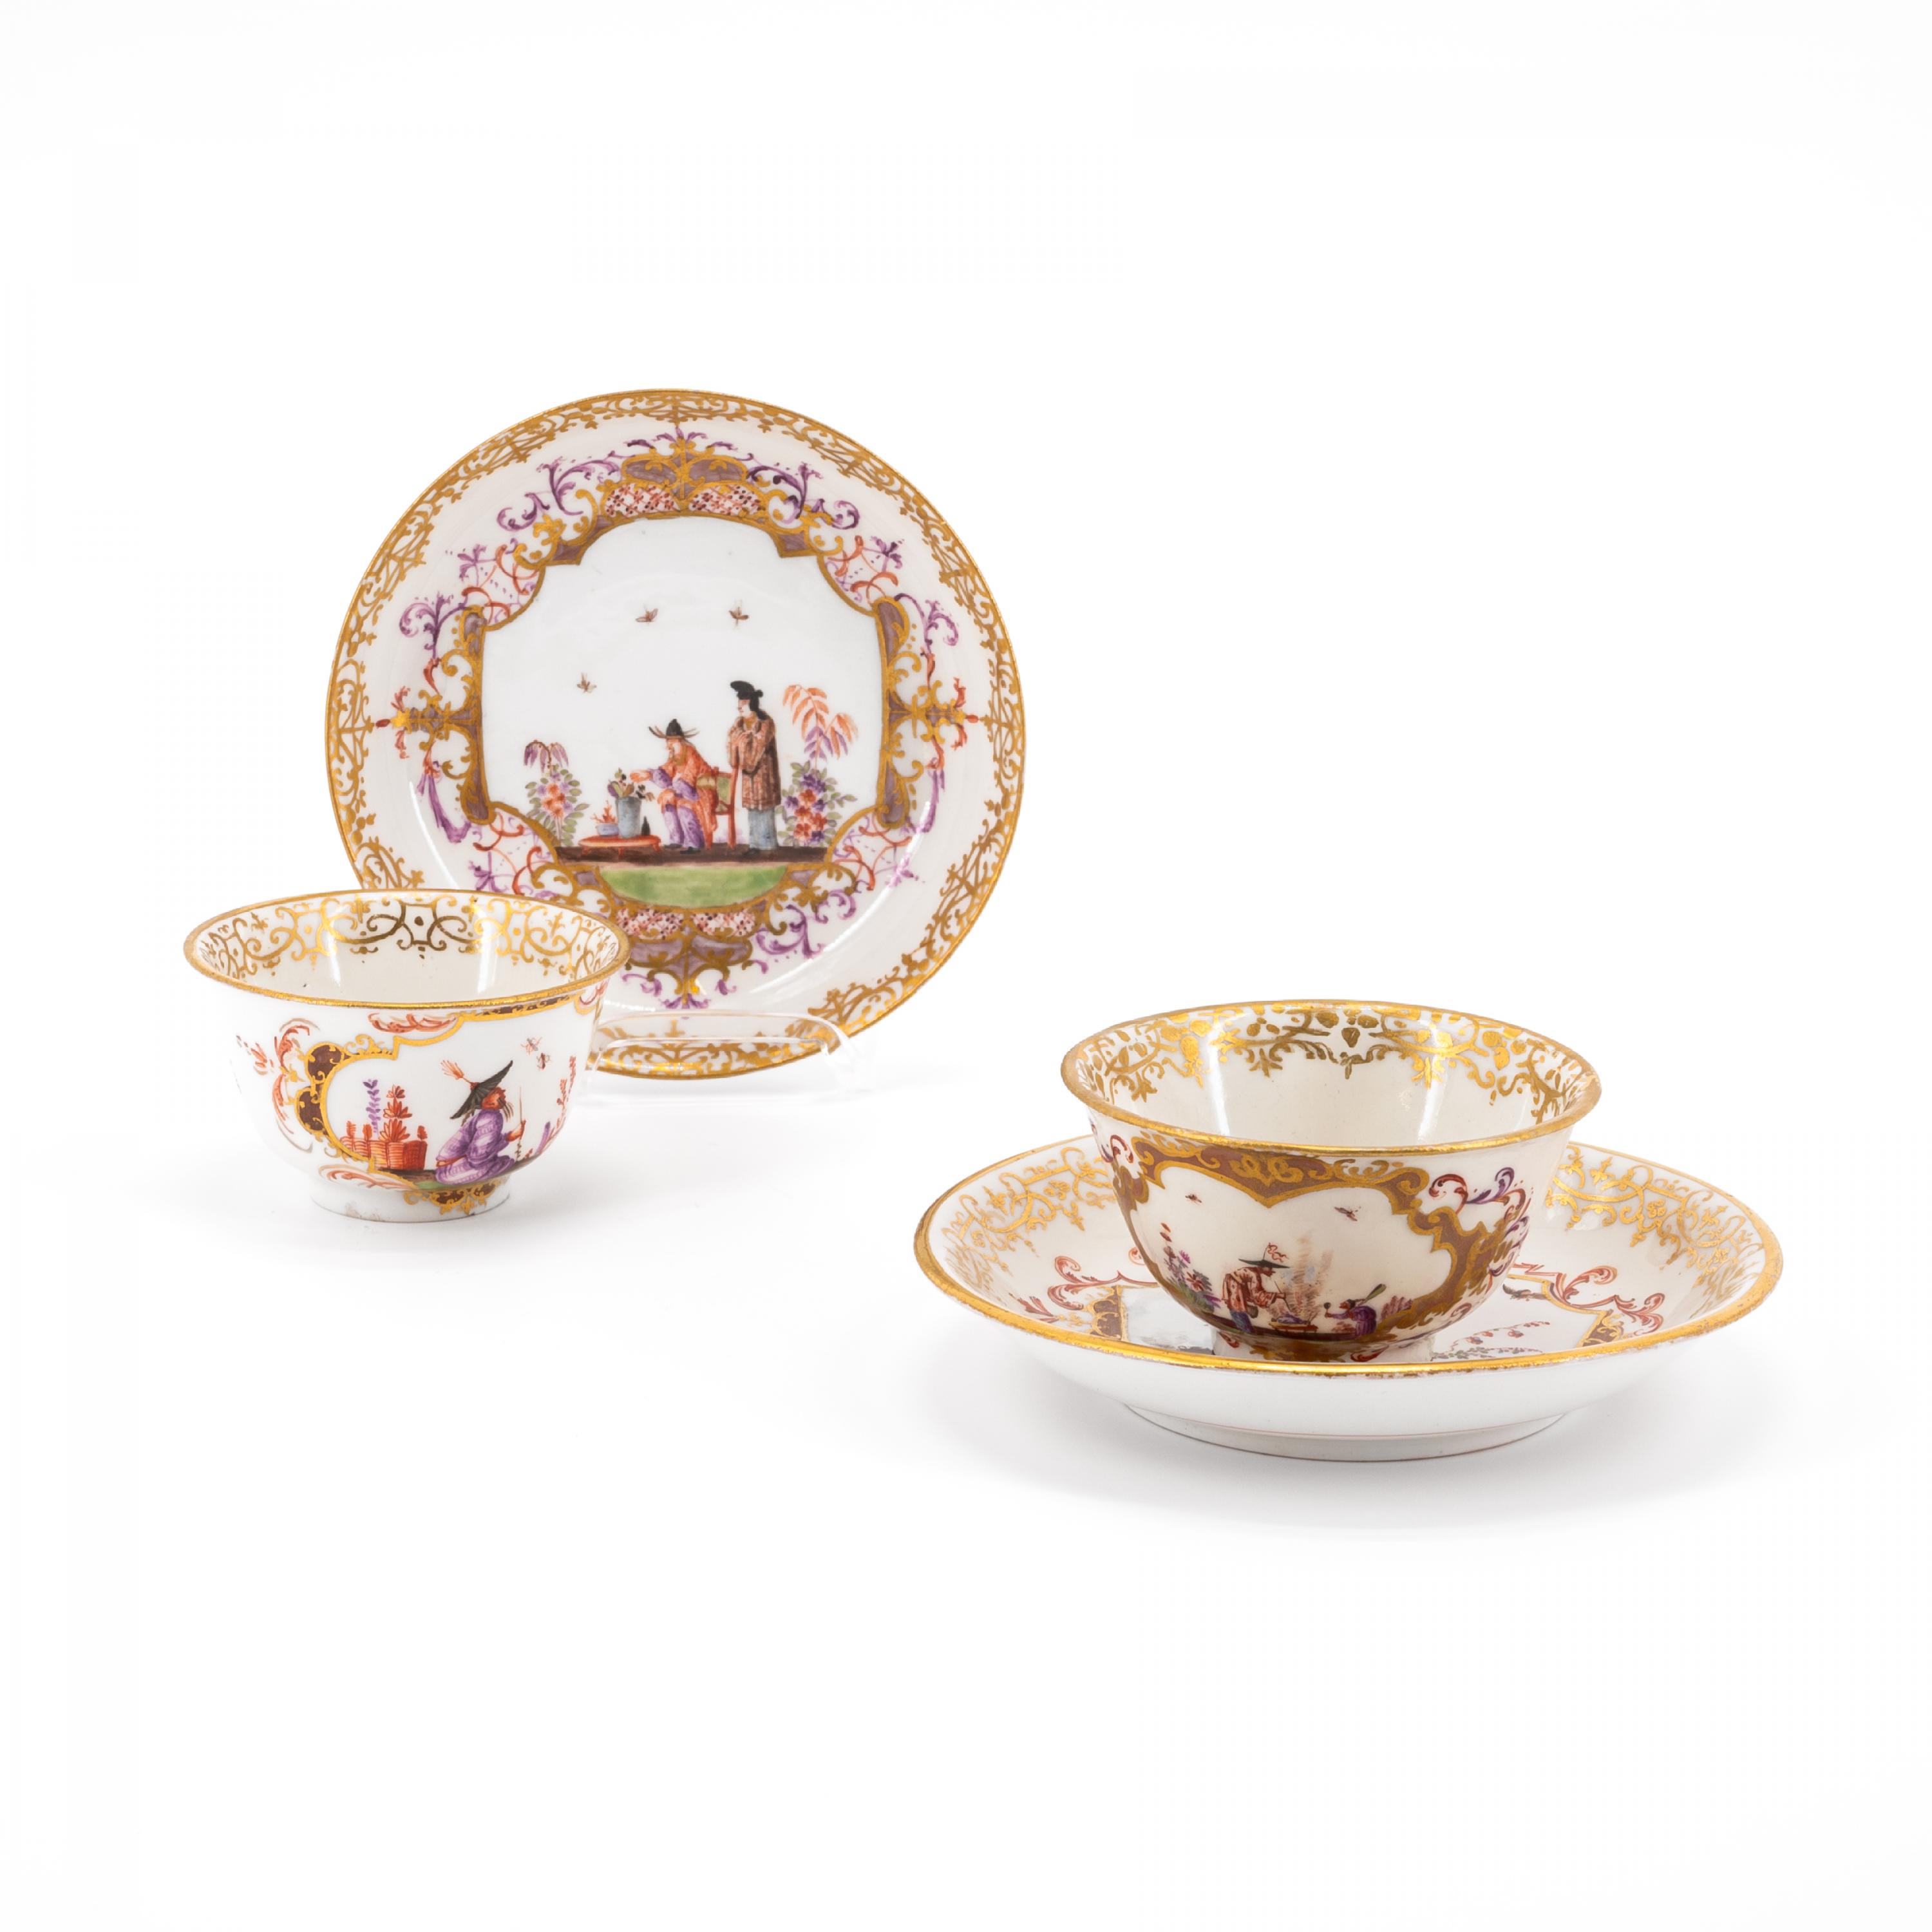 TWO PORCELAIN TEA BOWLS WITH SAUERES AND CHINOISERIES